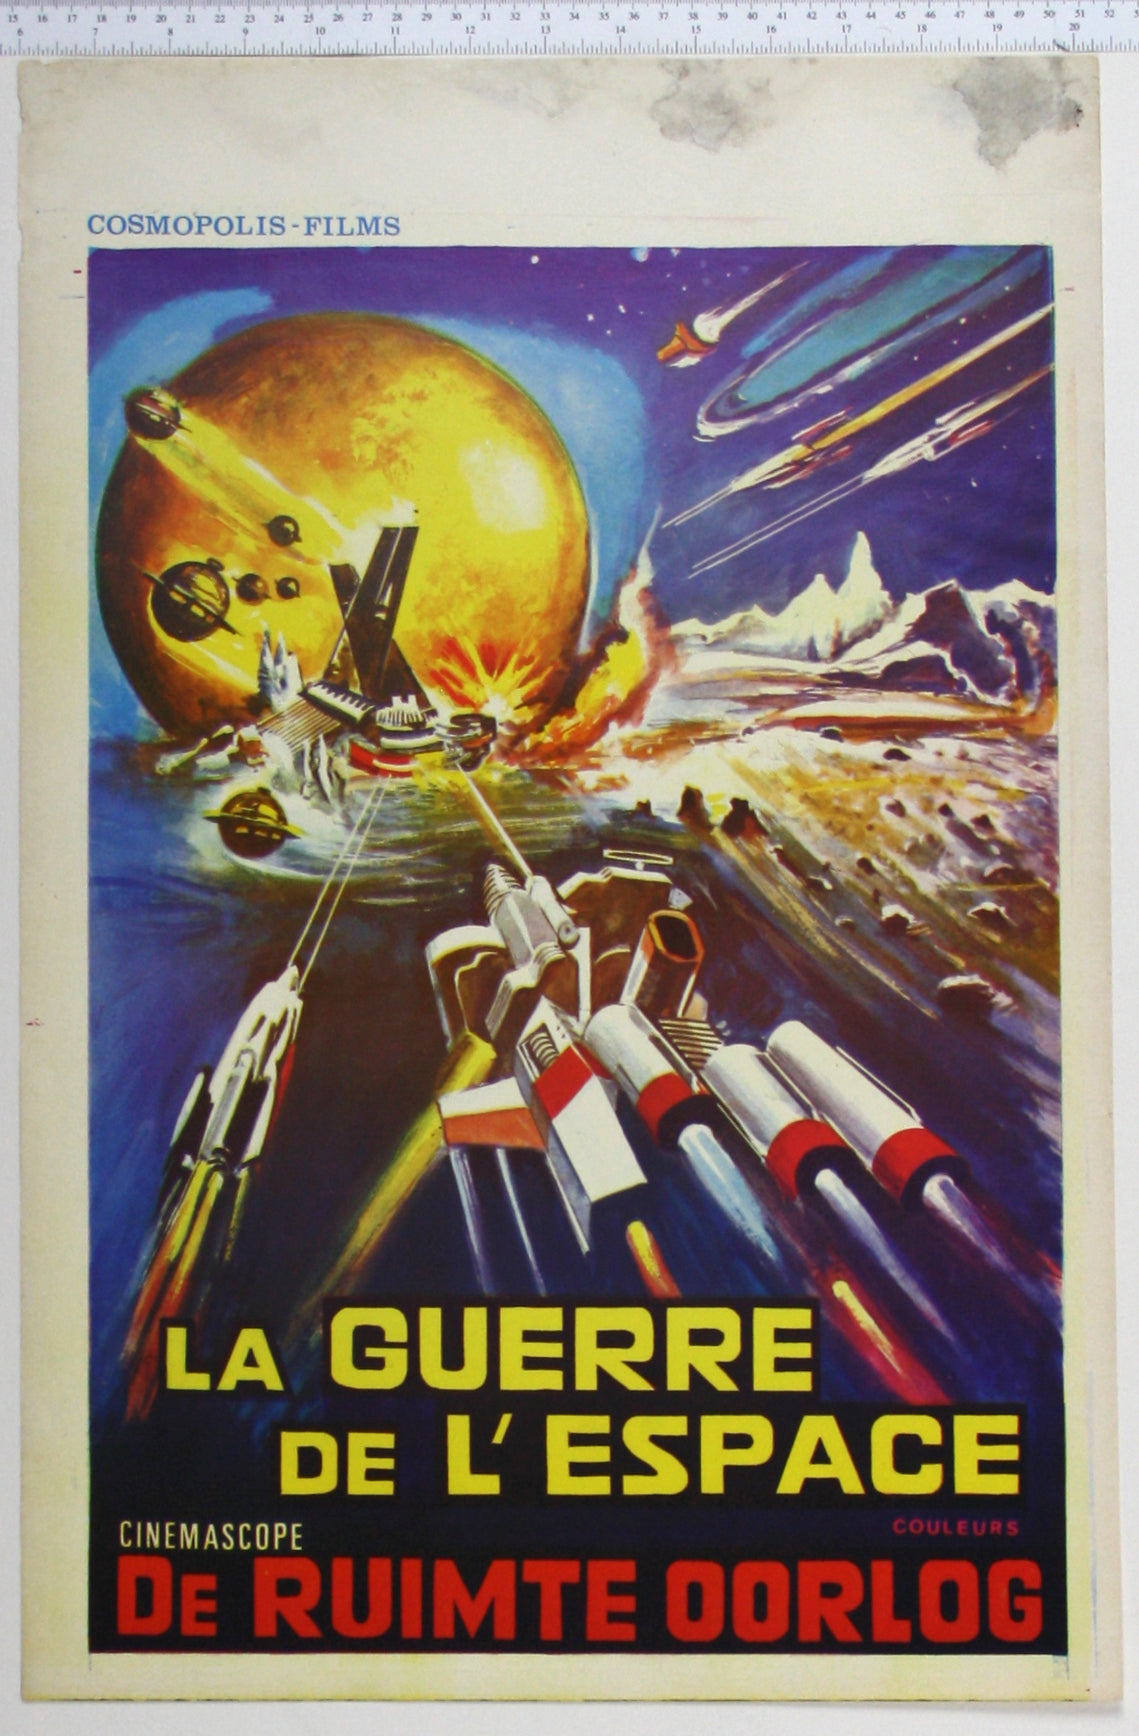 Artwork of space battle with huge yellow planet at rear, spaceships firing at each other, planet surface at right.